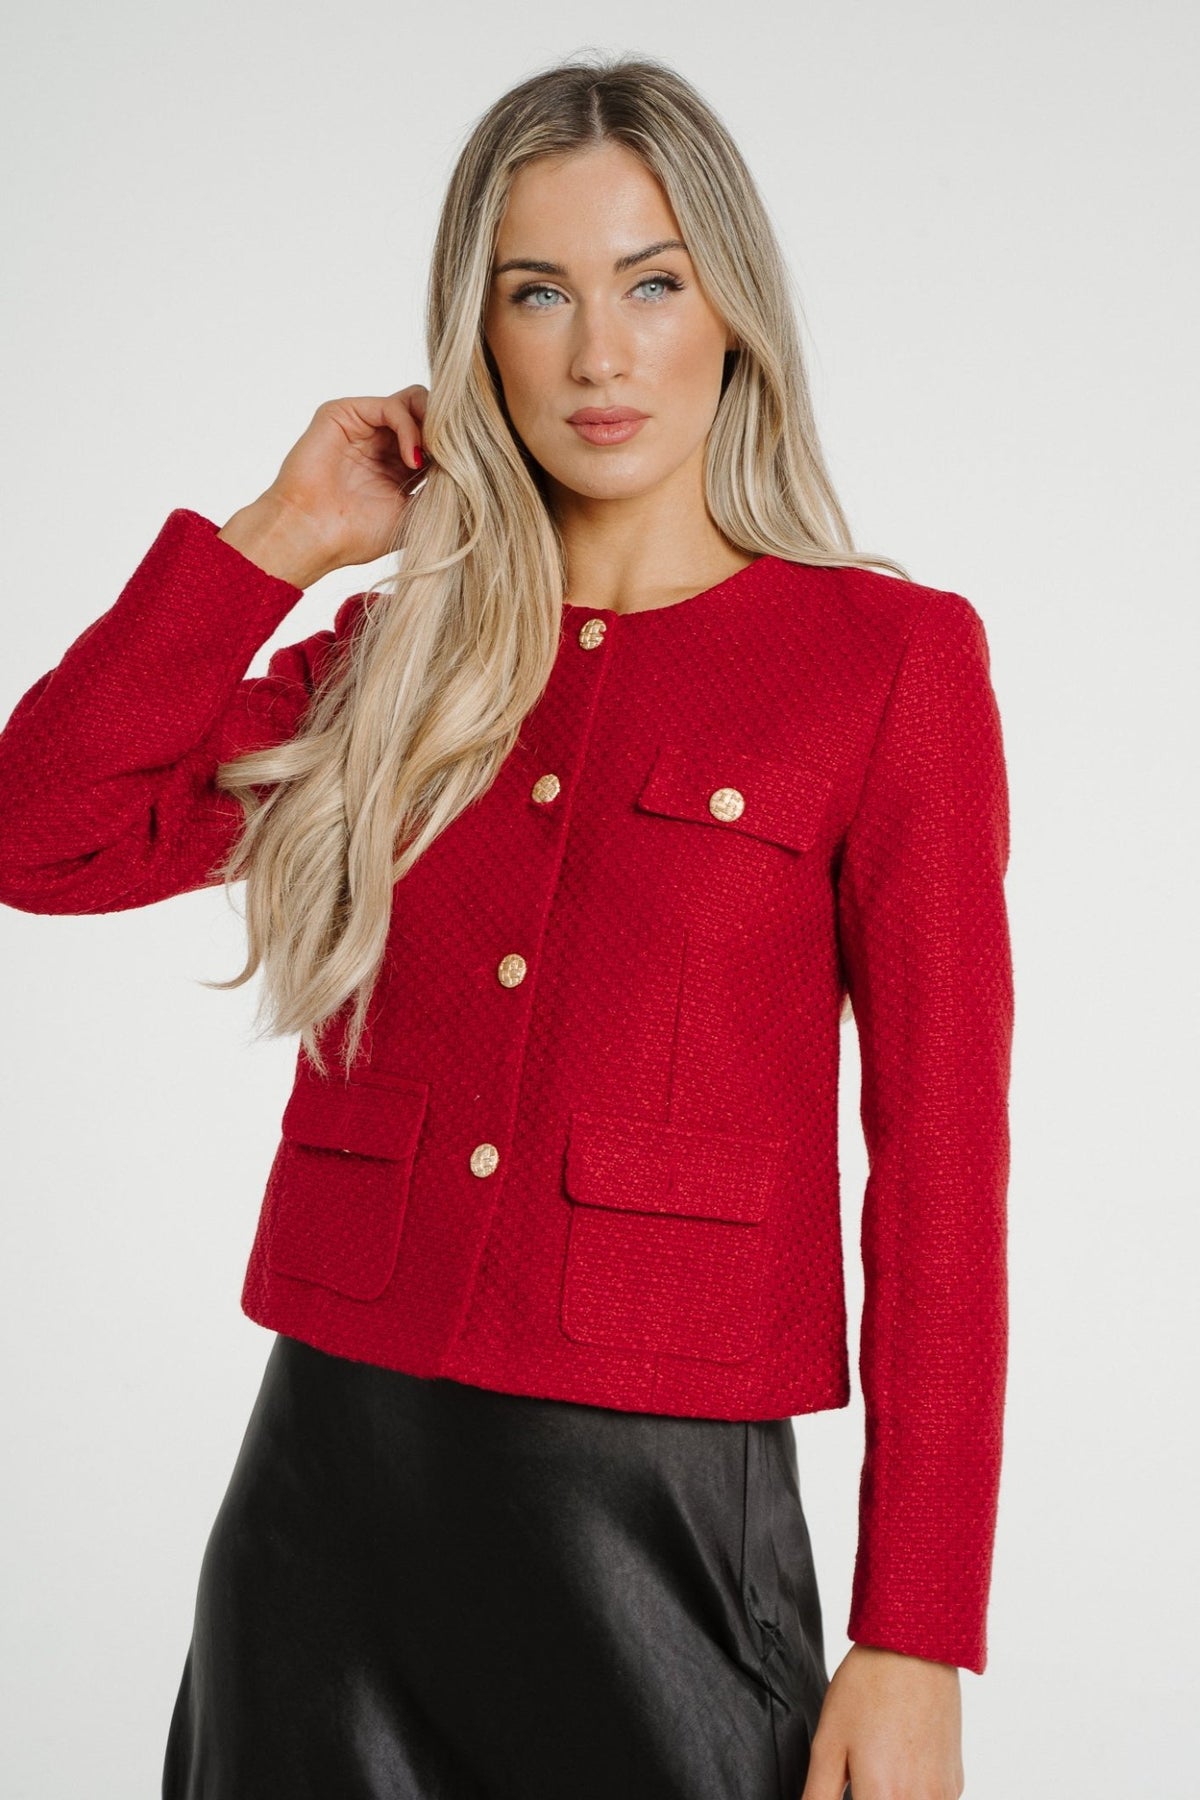 Polly Tweed Jacket In Red - The Walk in Wardrobe